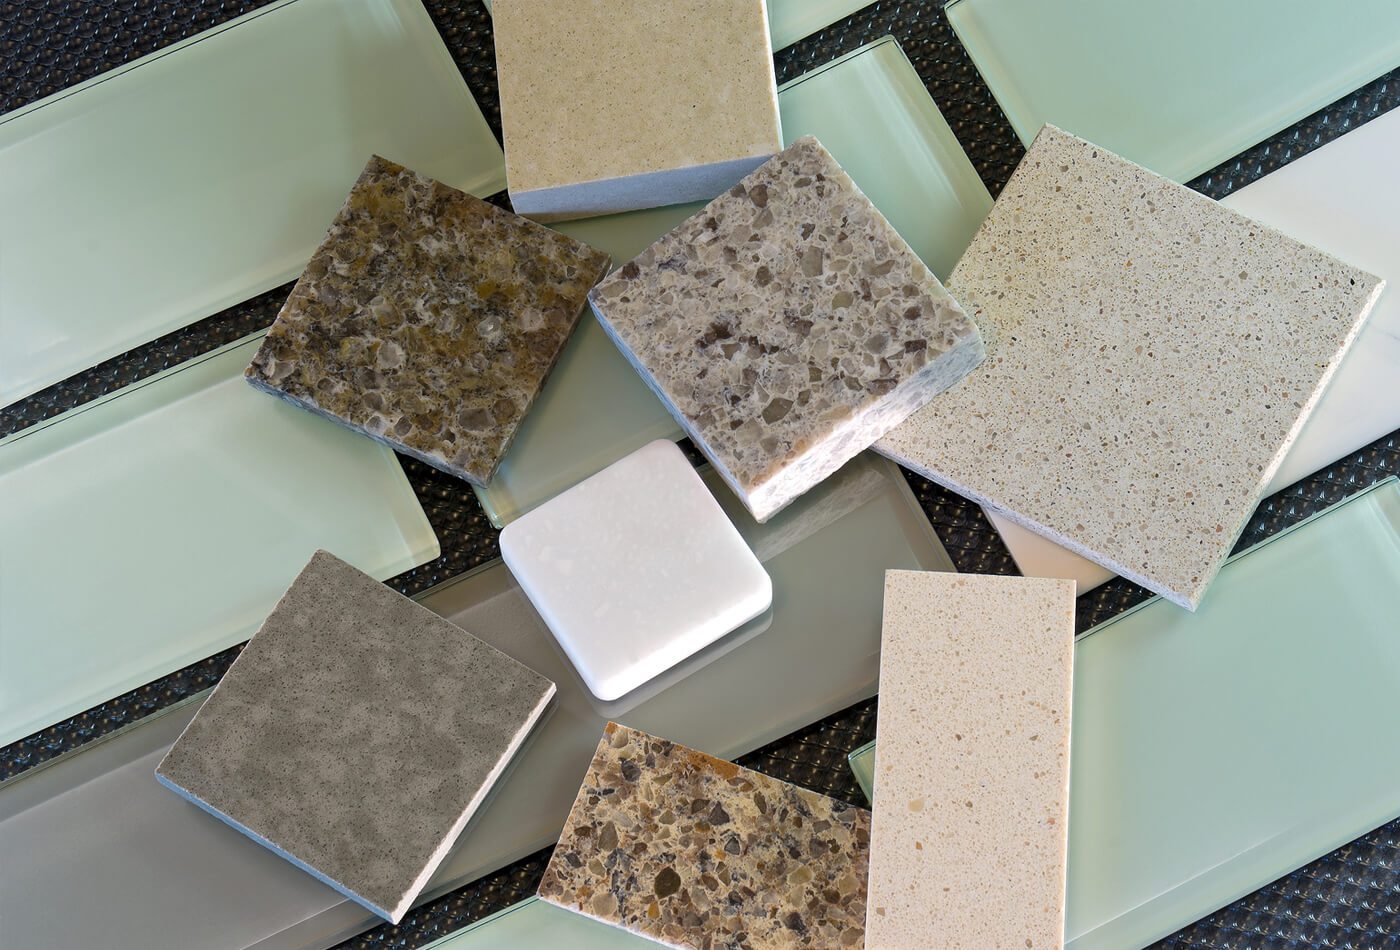 What Are the Benefits of Using Natural Stone